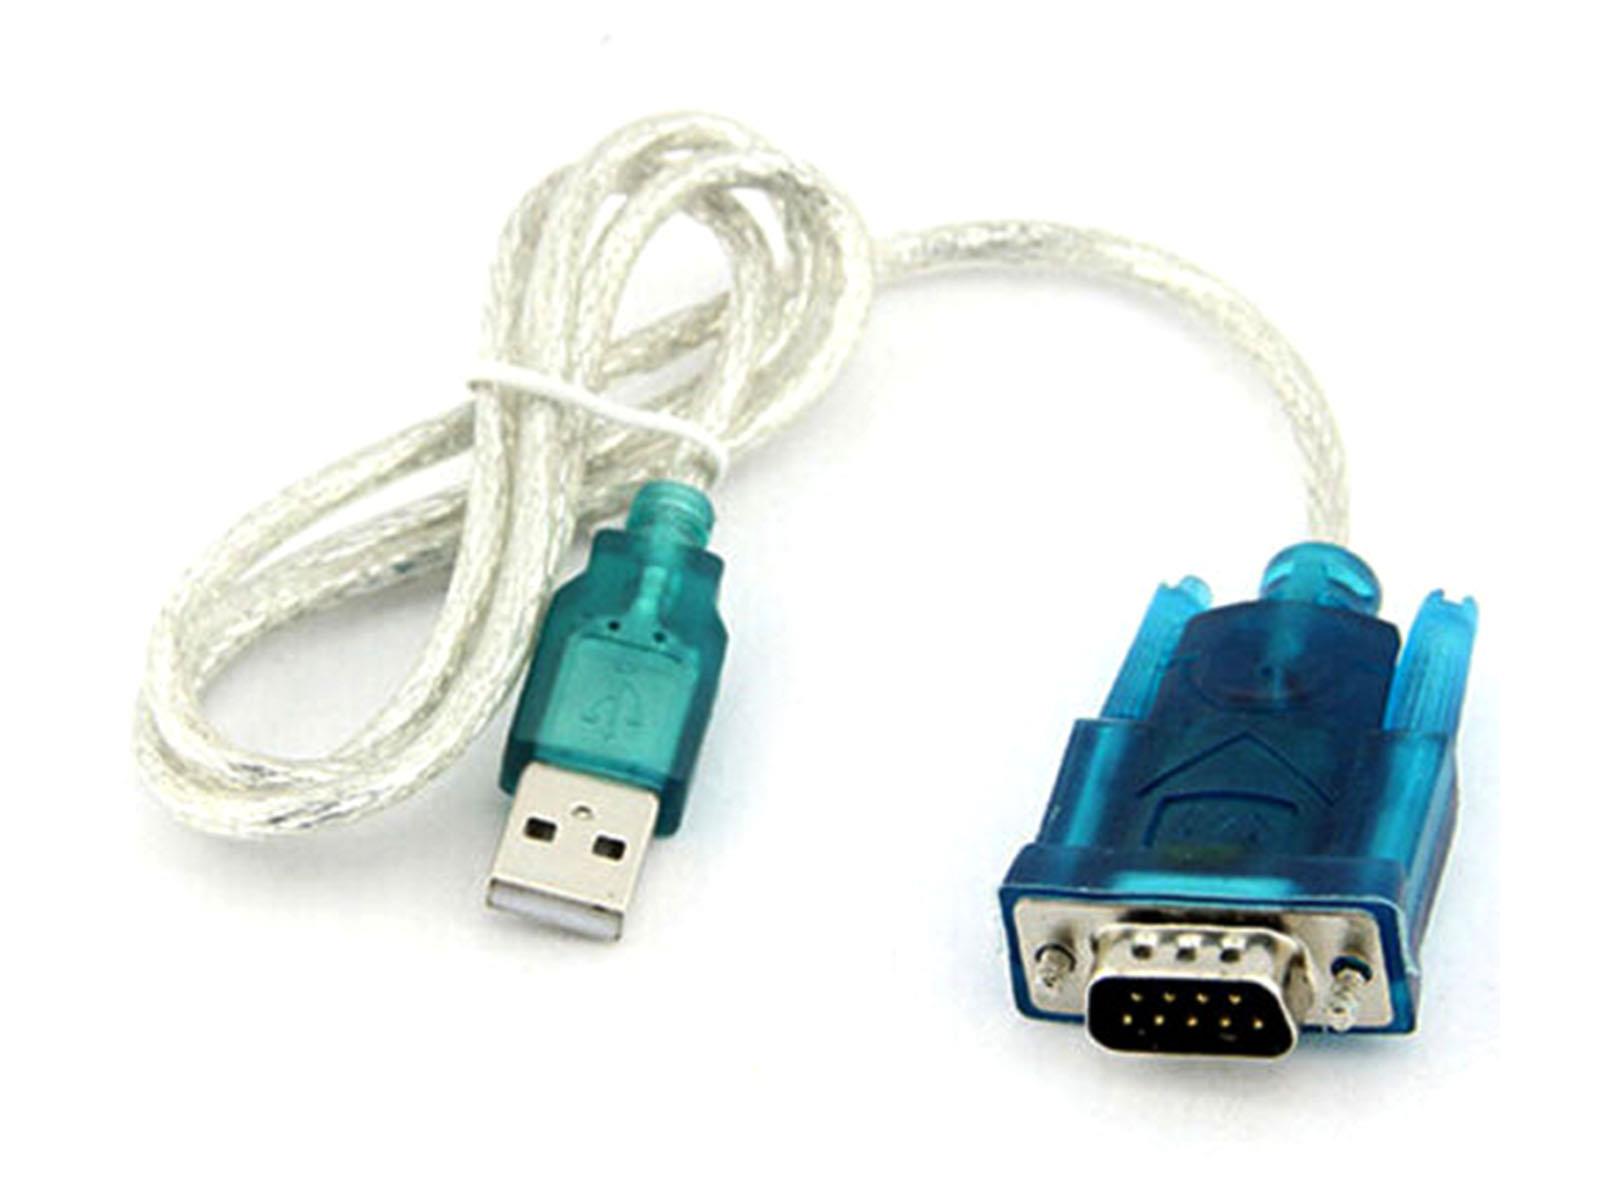 RS232 Adapter Cable